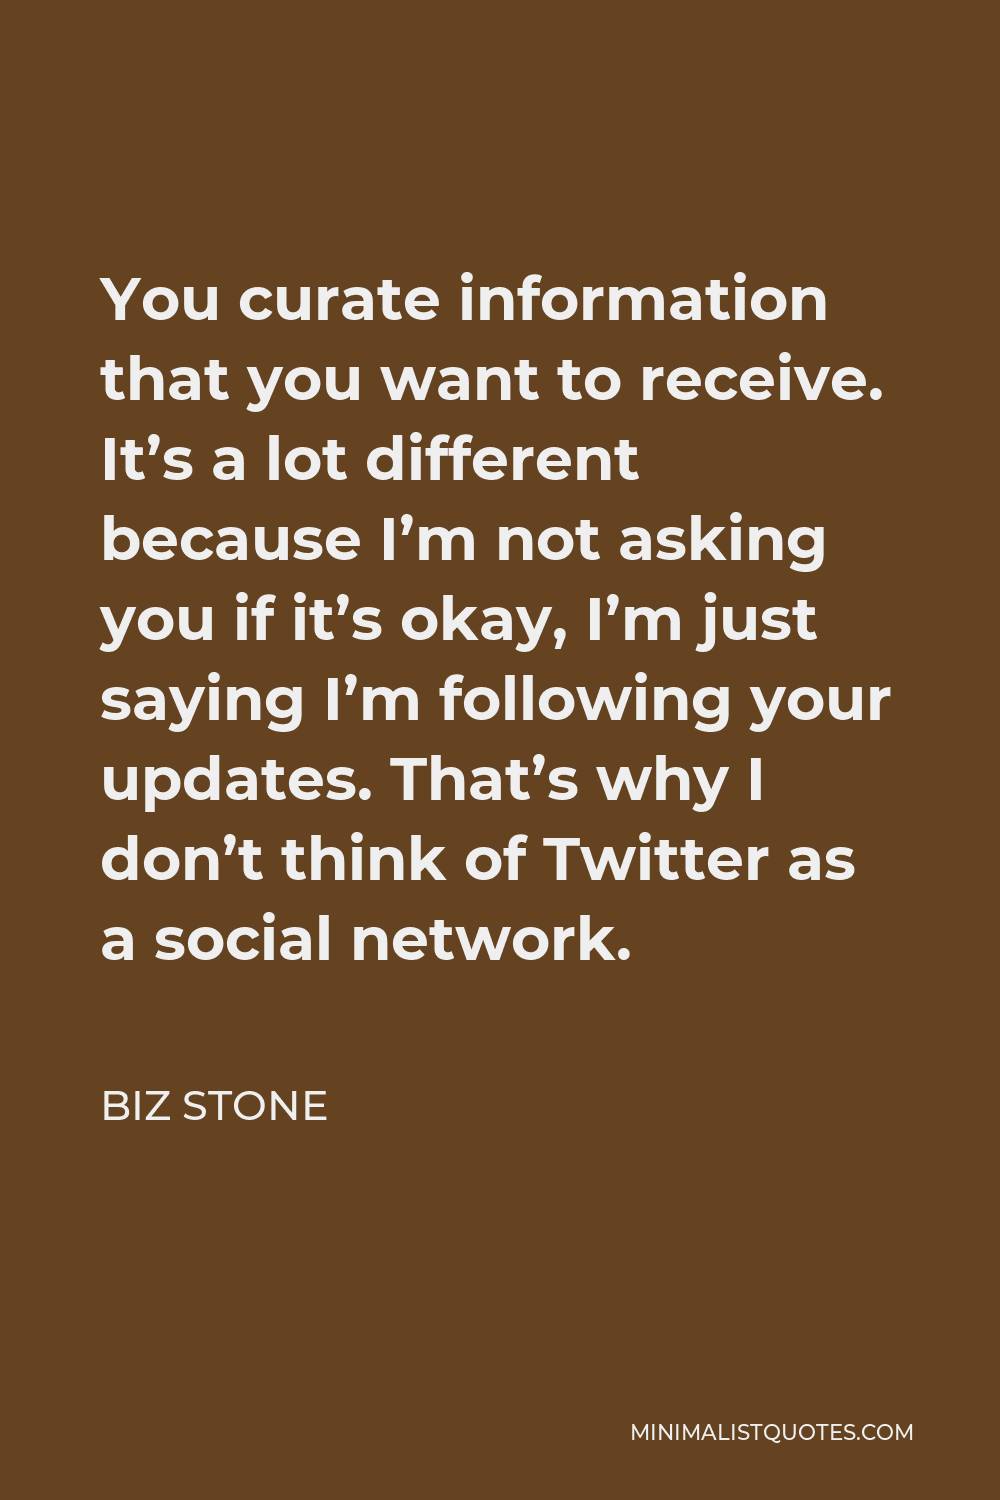 Biz Stone Quote - You curate information that you want to receive. It’s a lot different because I’m not asking you if it’s okay, I’m just saying I’m following your updates. That’s why I don’t think of Twitter as a social network.